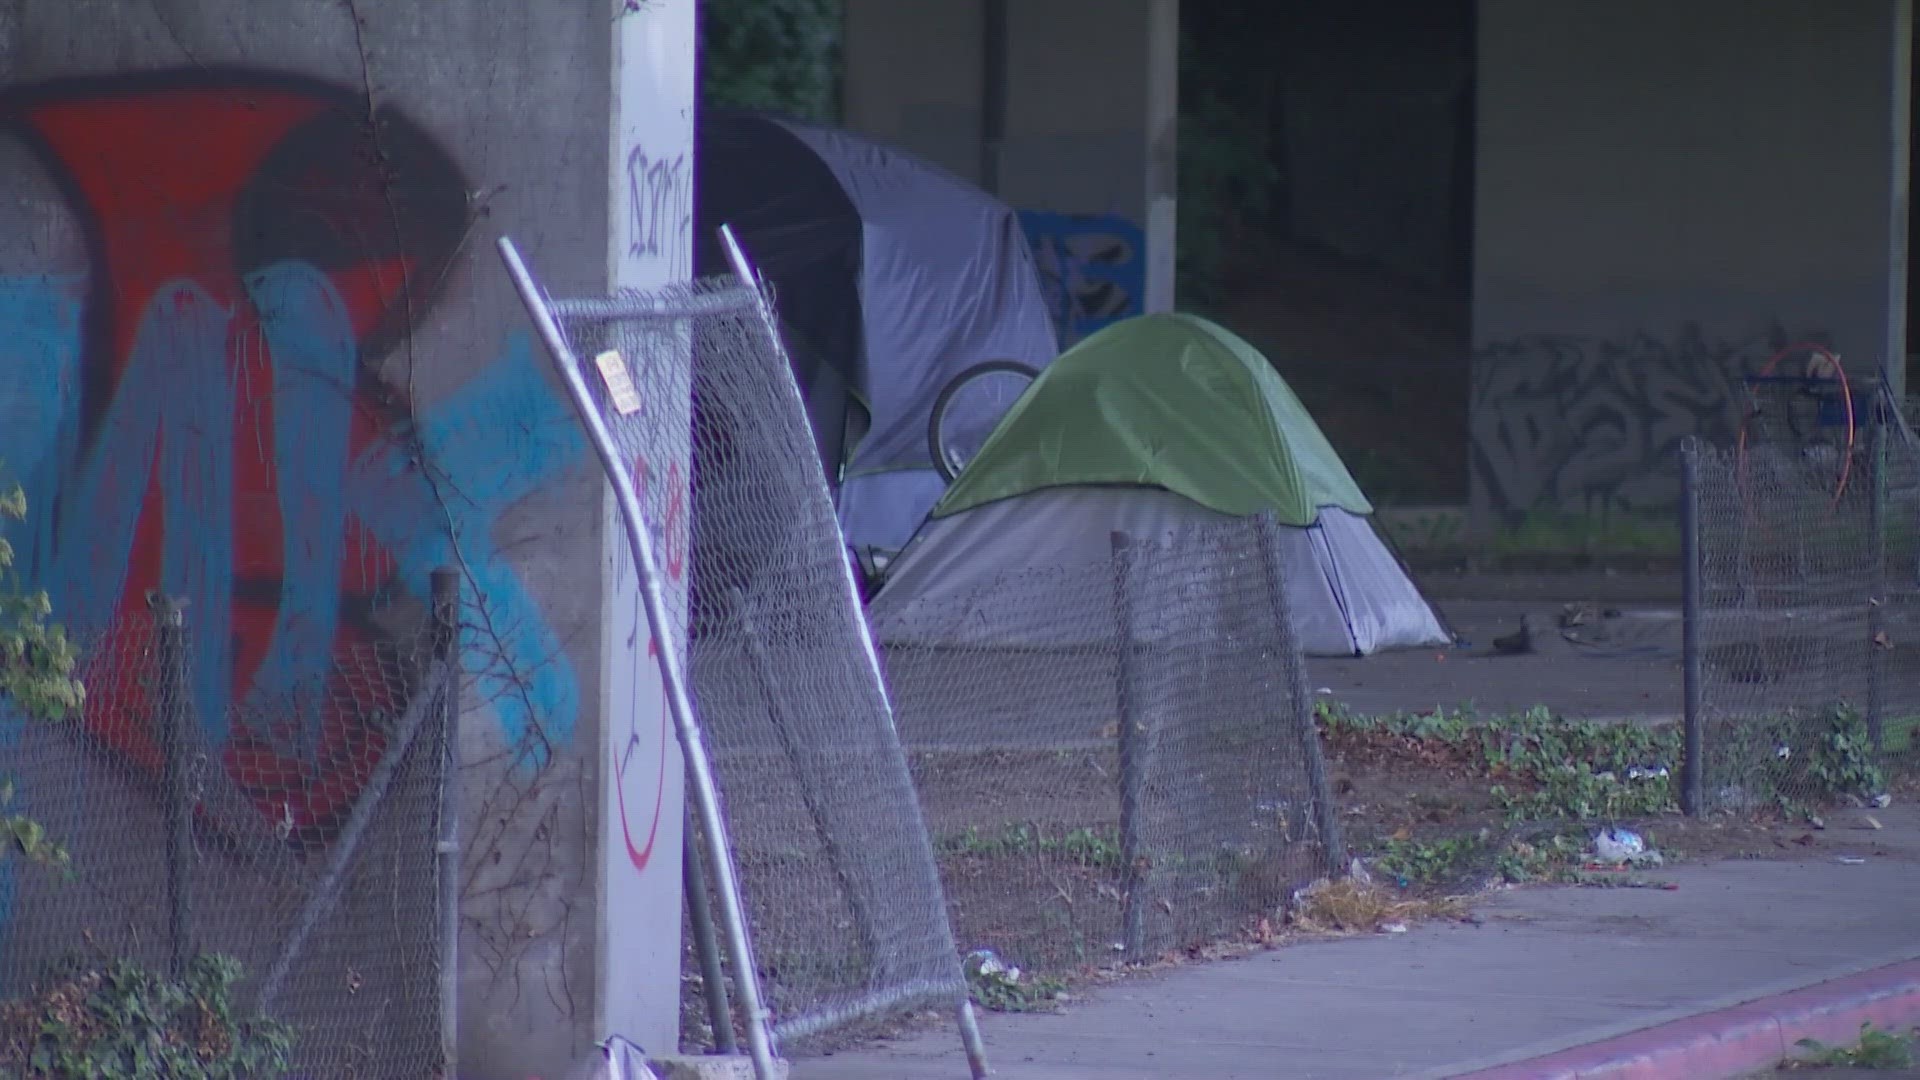 New data shows the camping ban may have been effective in addressing homelessness.